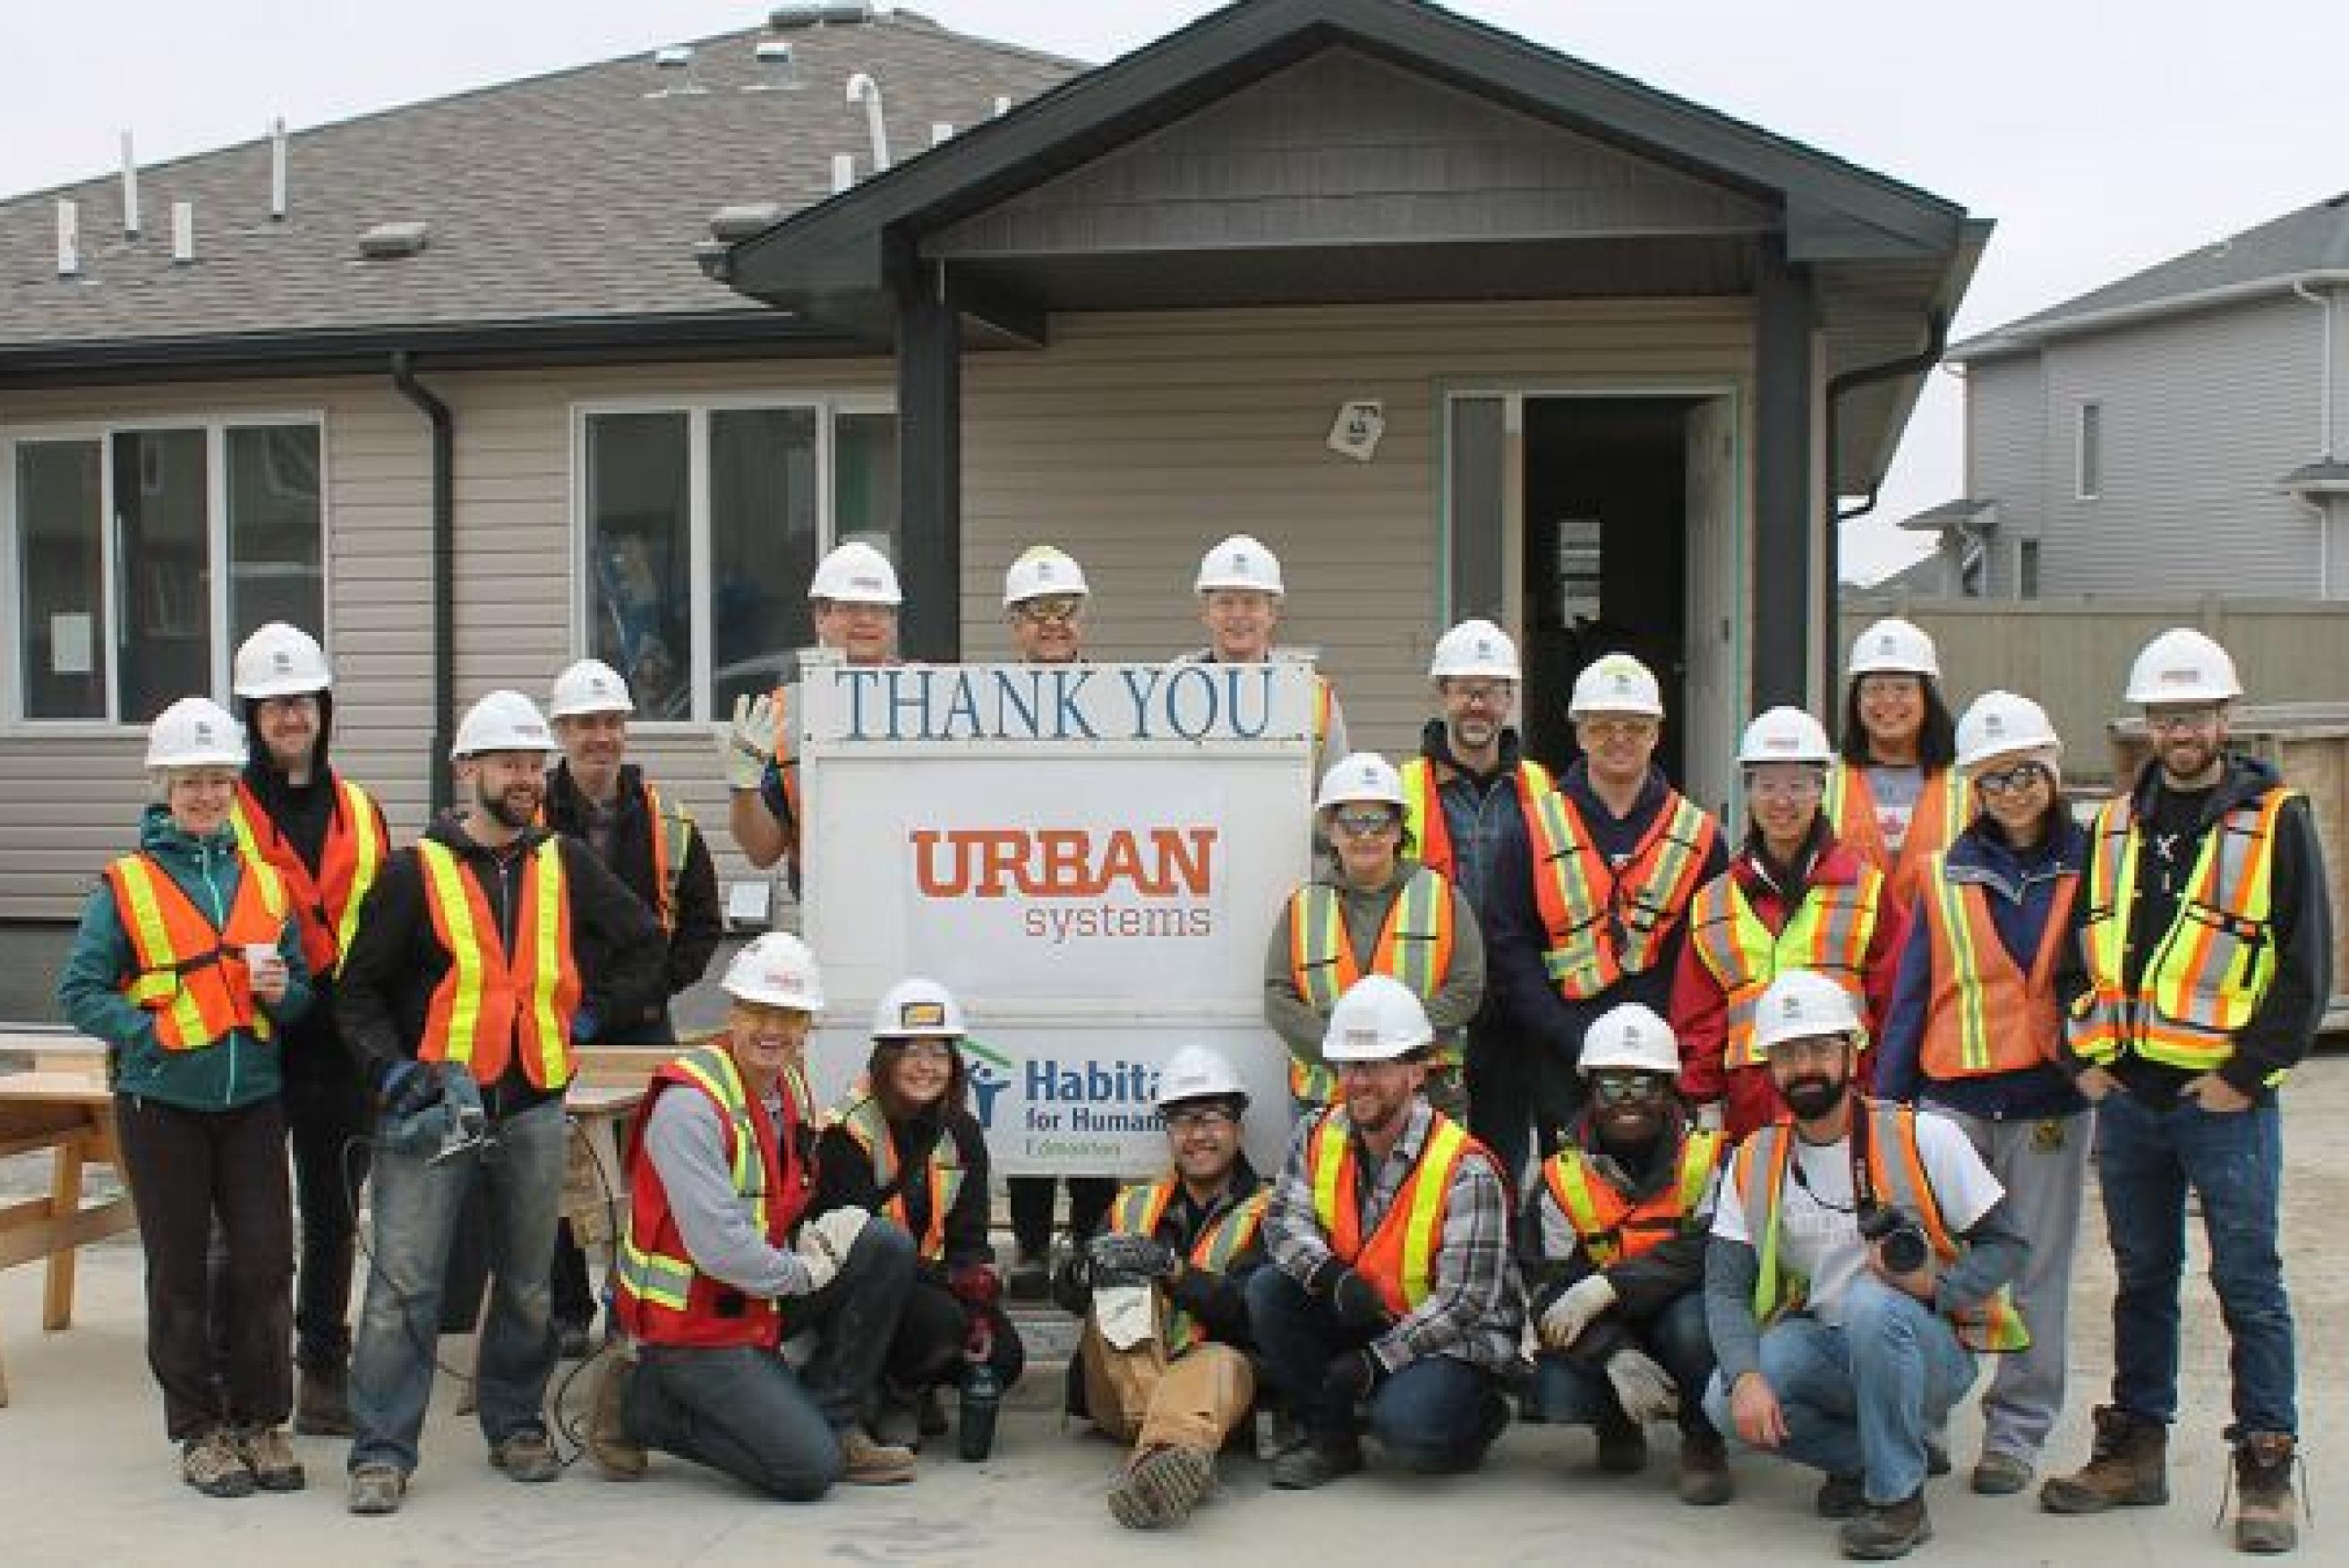 Group of Urban Systems construction workers standing outside of a house holding a sign.